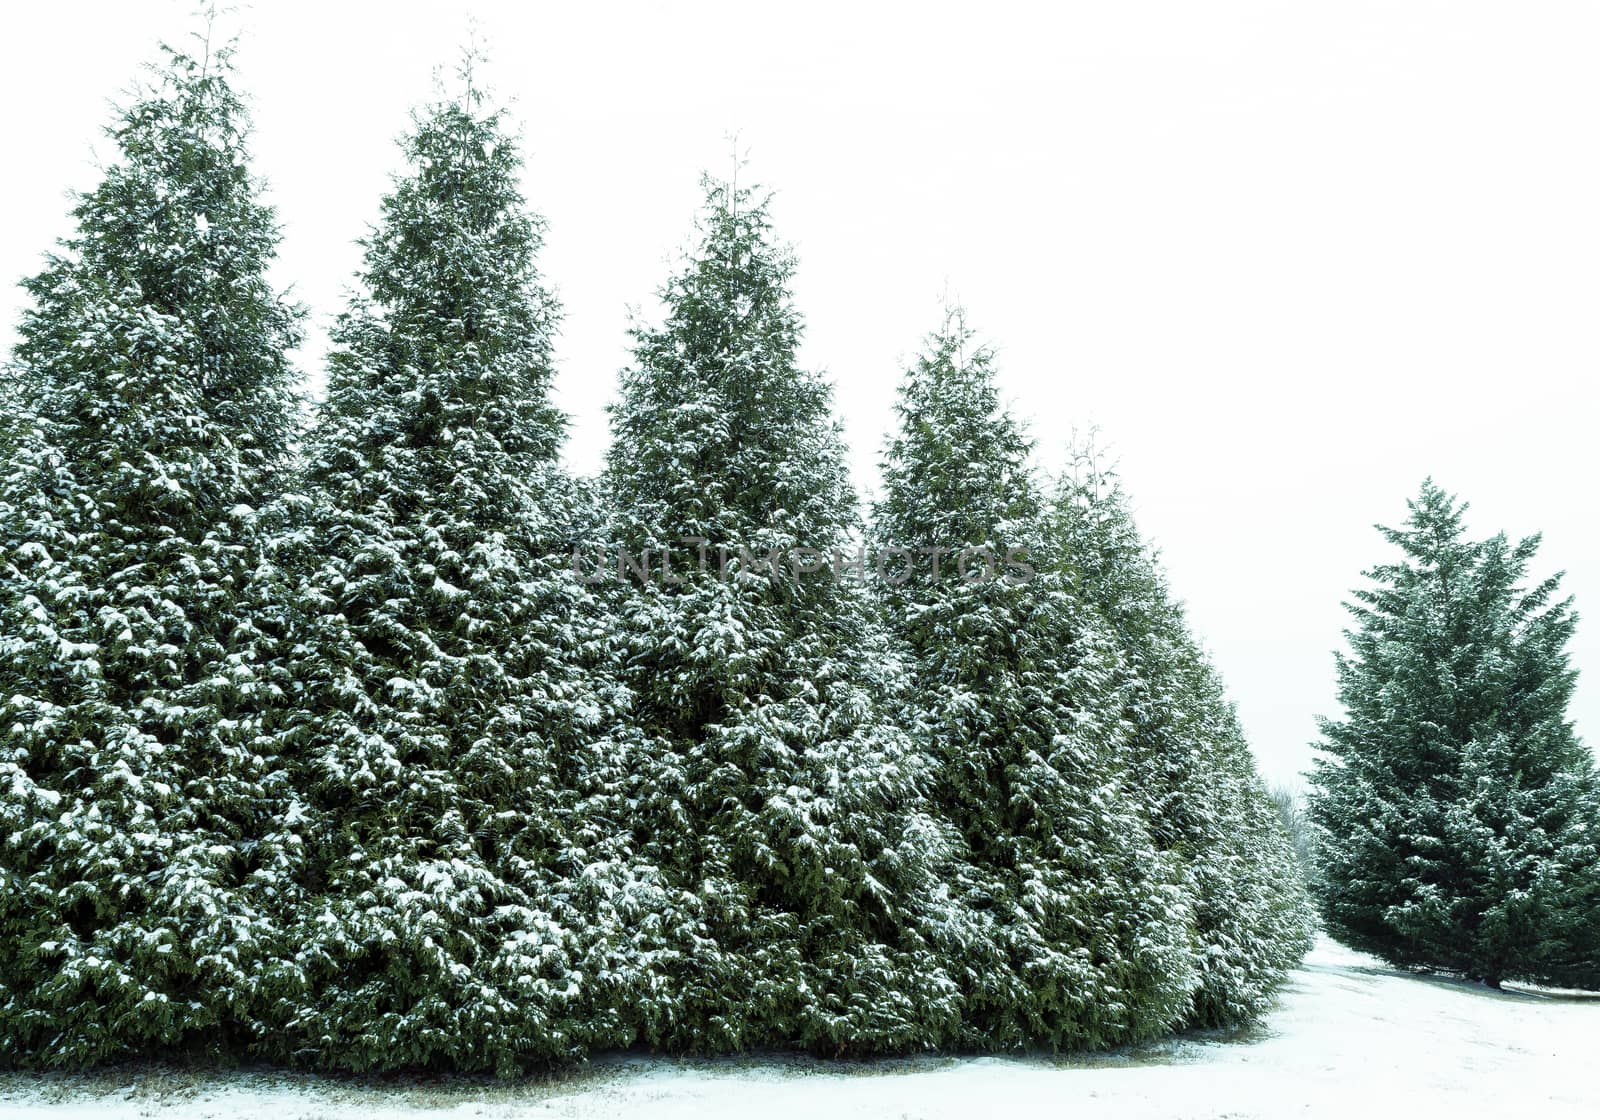 Snow Covered Evergreen Trees by stockbuster1